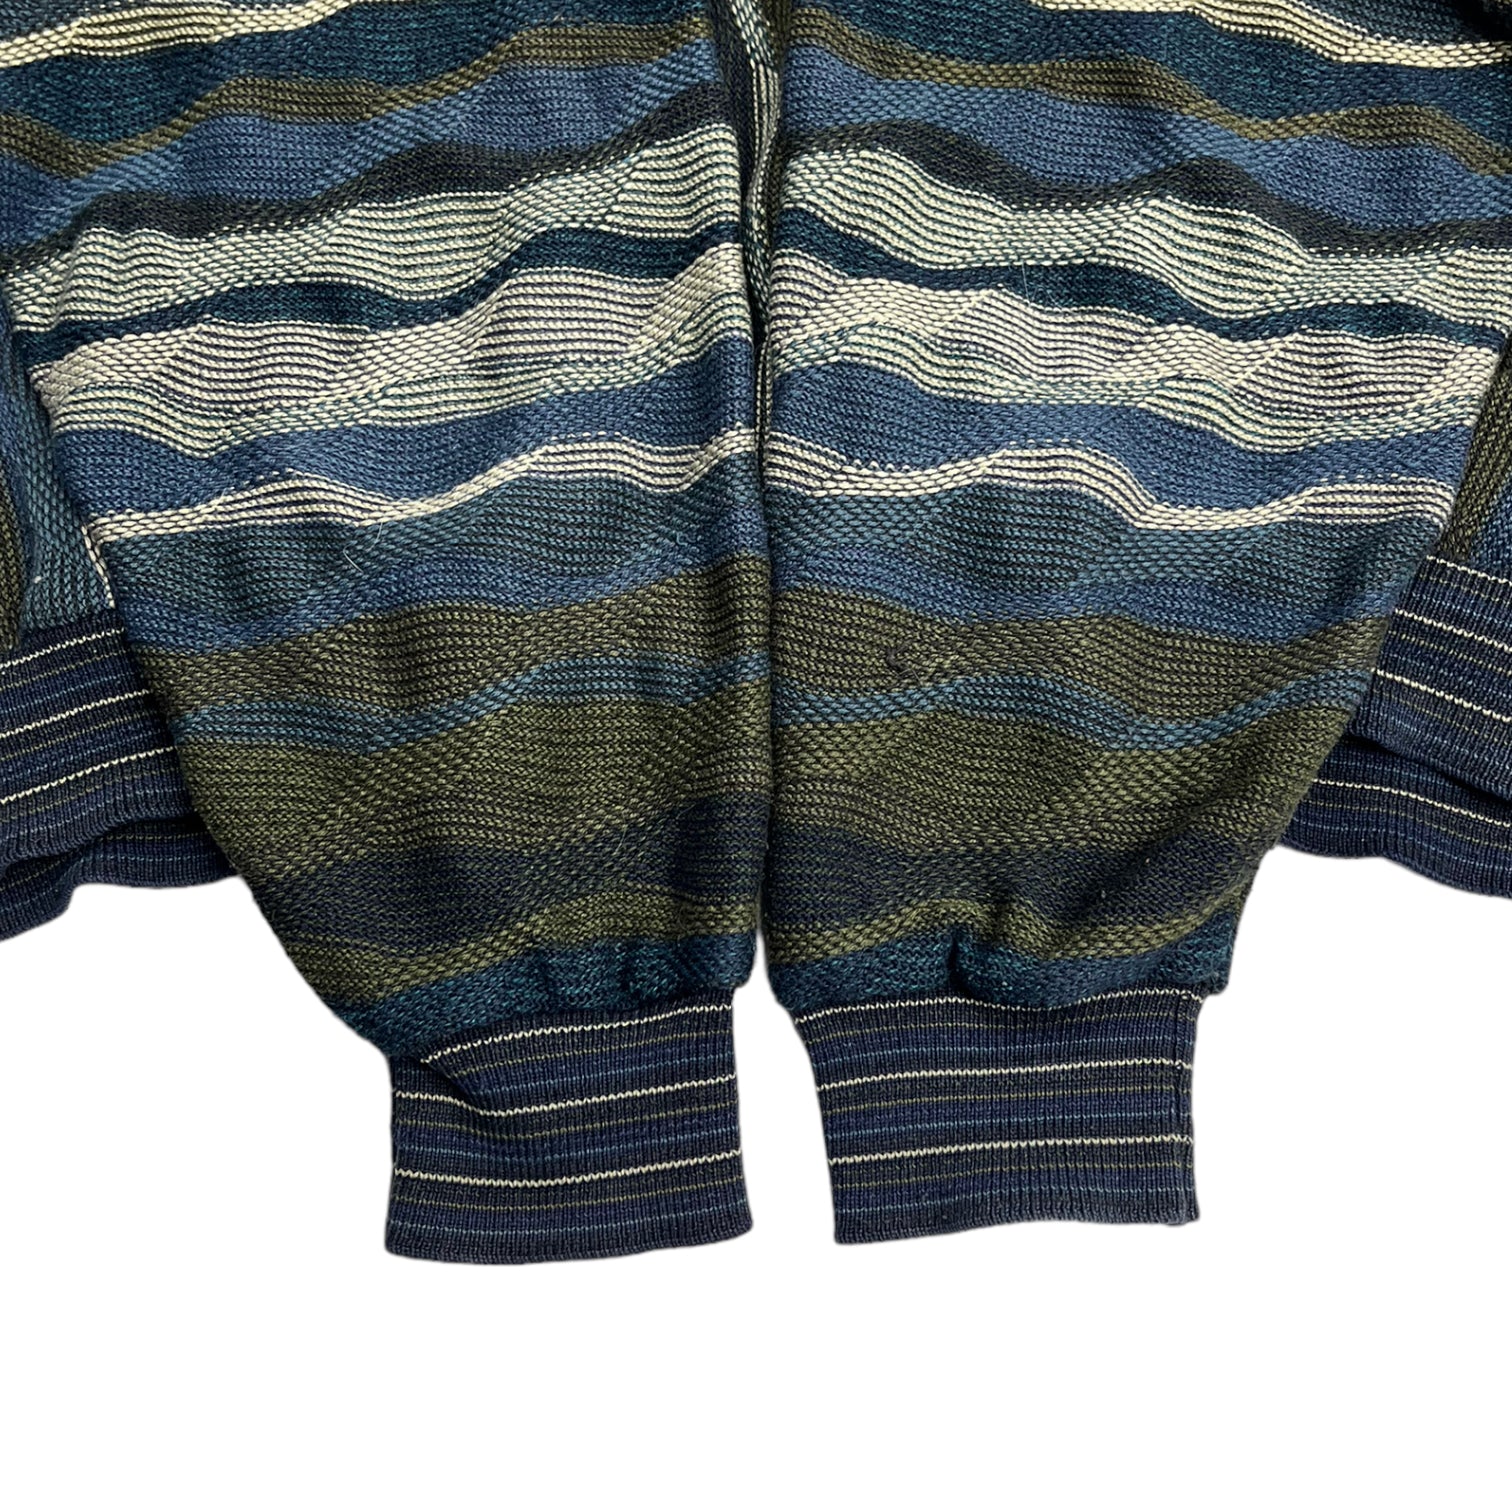 Vintage Tundra Squiggly Vertical Patterned Knit